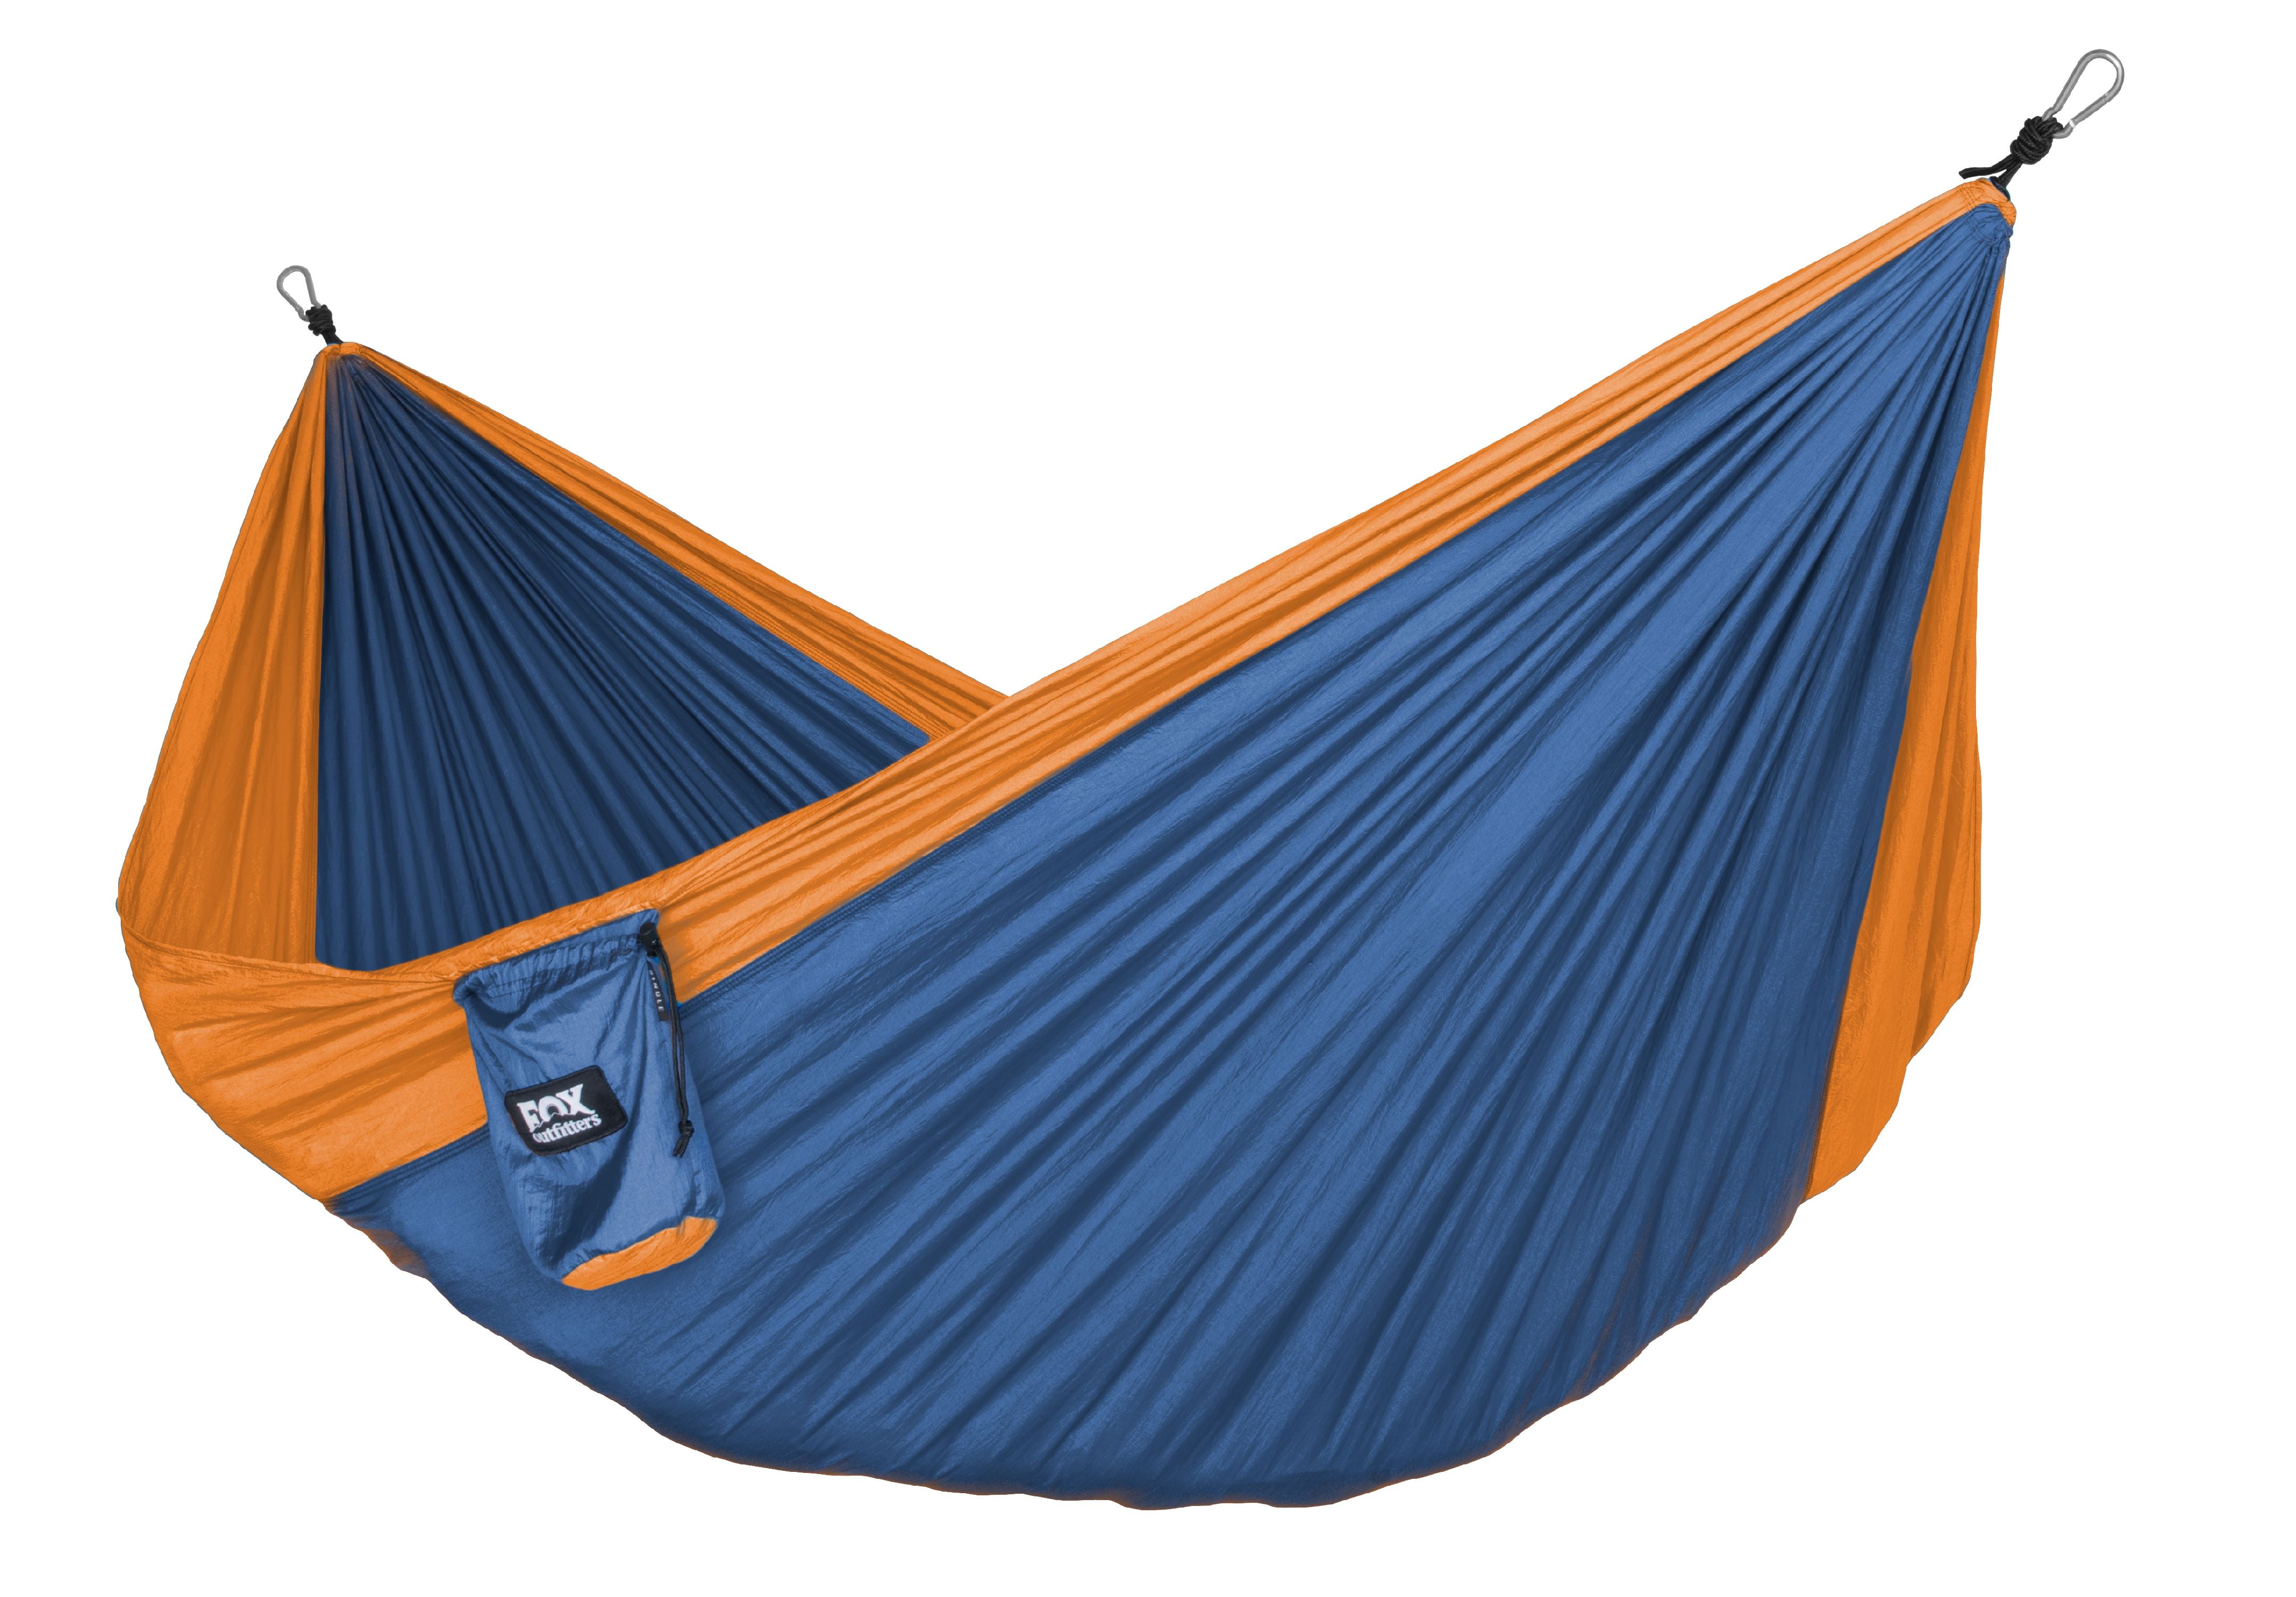 Yard Lightweight Portable Nylon Parachute Hammock for Backpacking Travel Hammock Straps /& Steel Carabiners Included Beach Fox Outfitters Neolite Double Camping Hammock